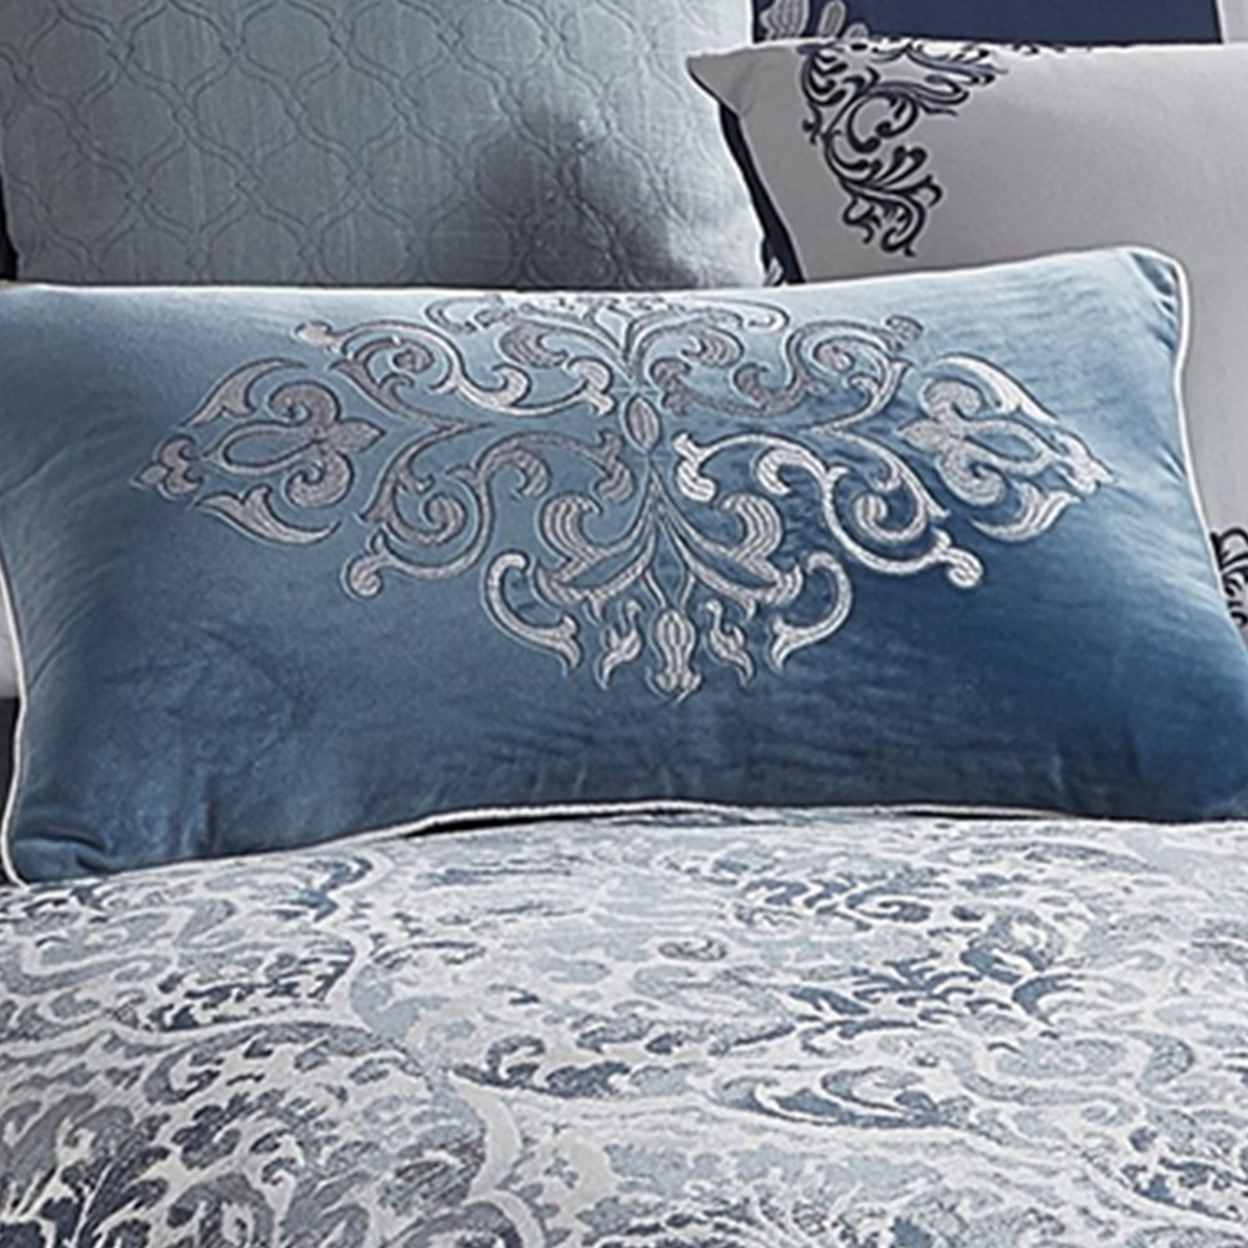 9 Piece Queen Polyester Comforter Set With Damask Prints, Blue And Gray- Saltoro Sherpi